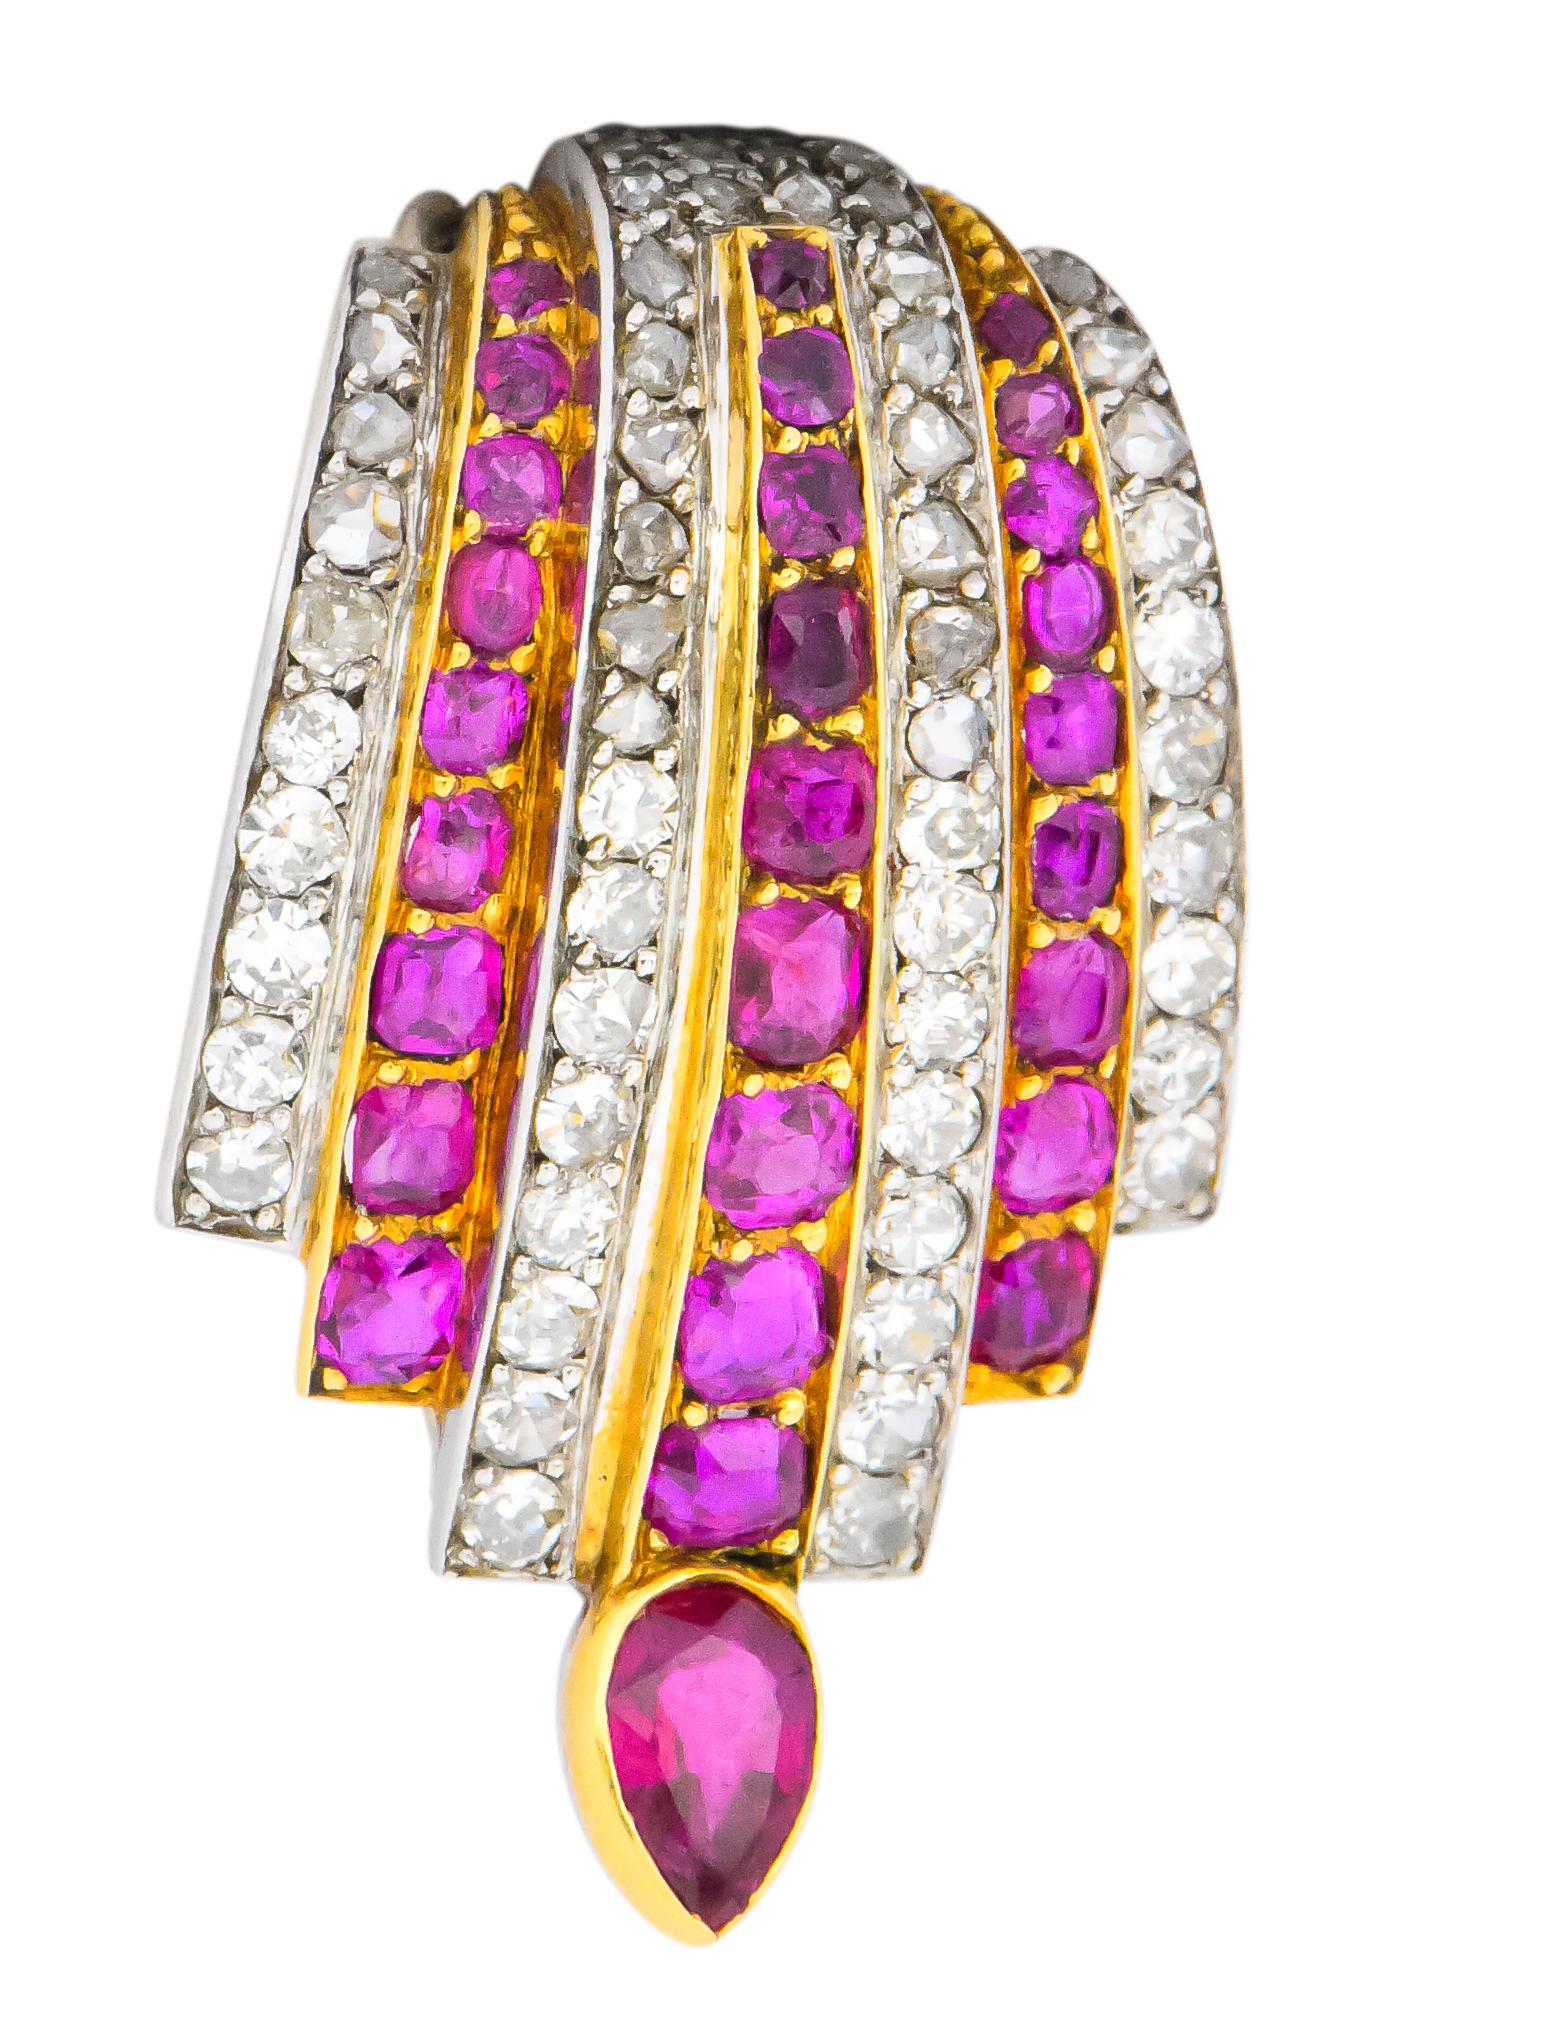 Brooch is designed as a domed formation comprised of seven rows of diamonds and Burmese rubies, alternating

Rows taper in length as a cascading motif that terminates as a bezel set pear cut Burma ruby

Cushion cut rubies are bead set in gold and